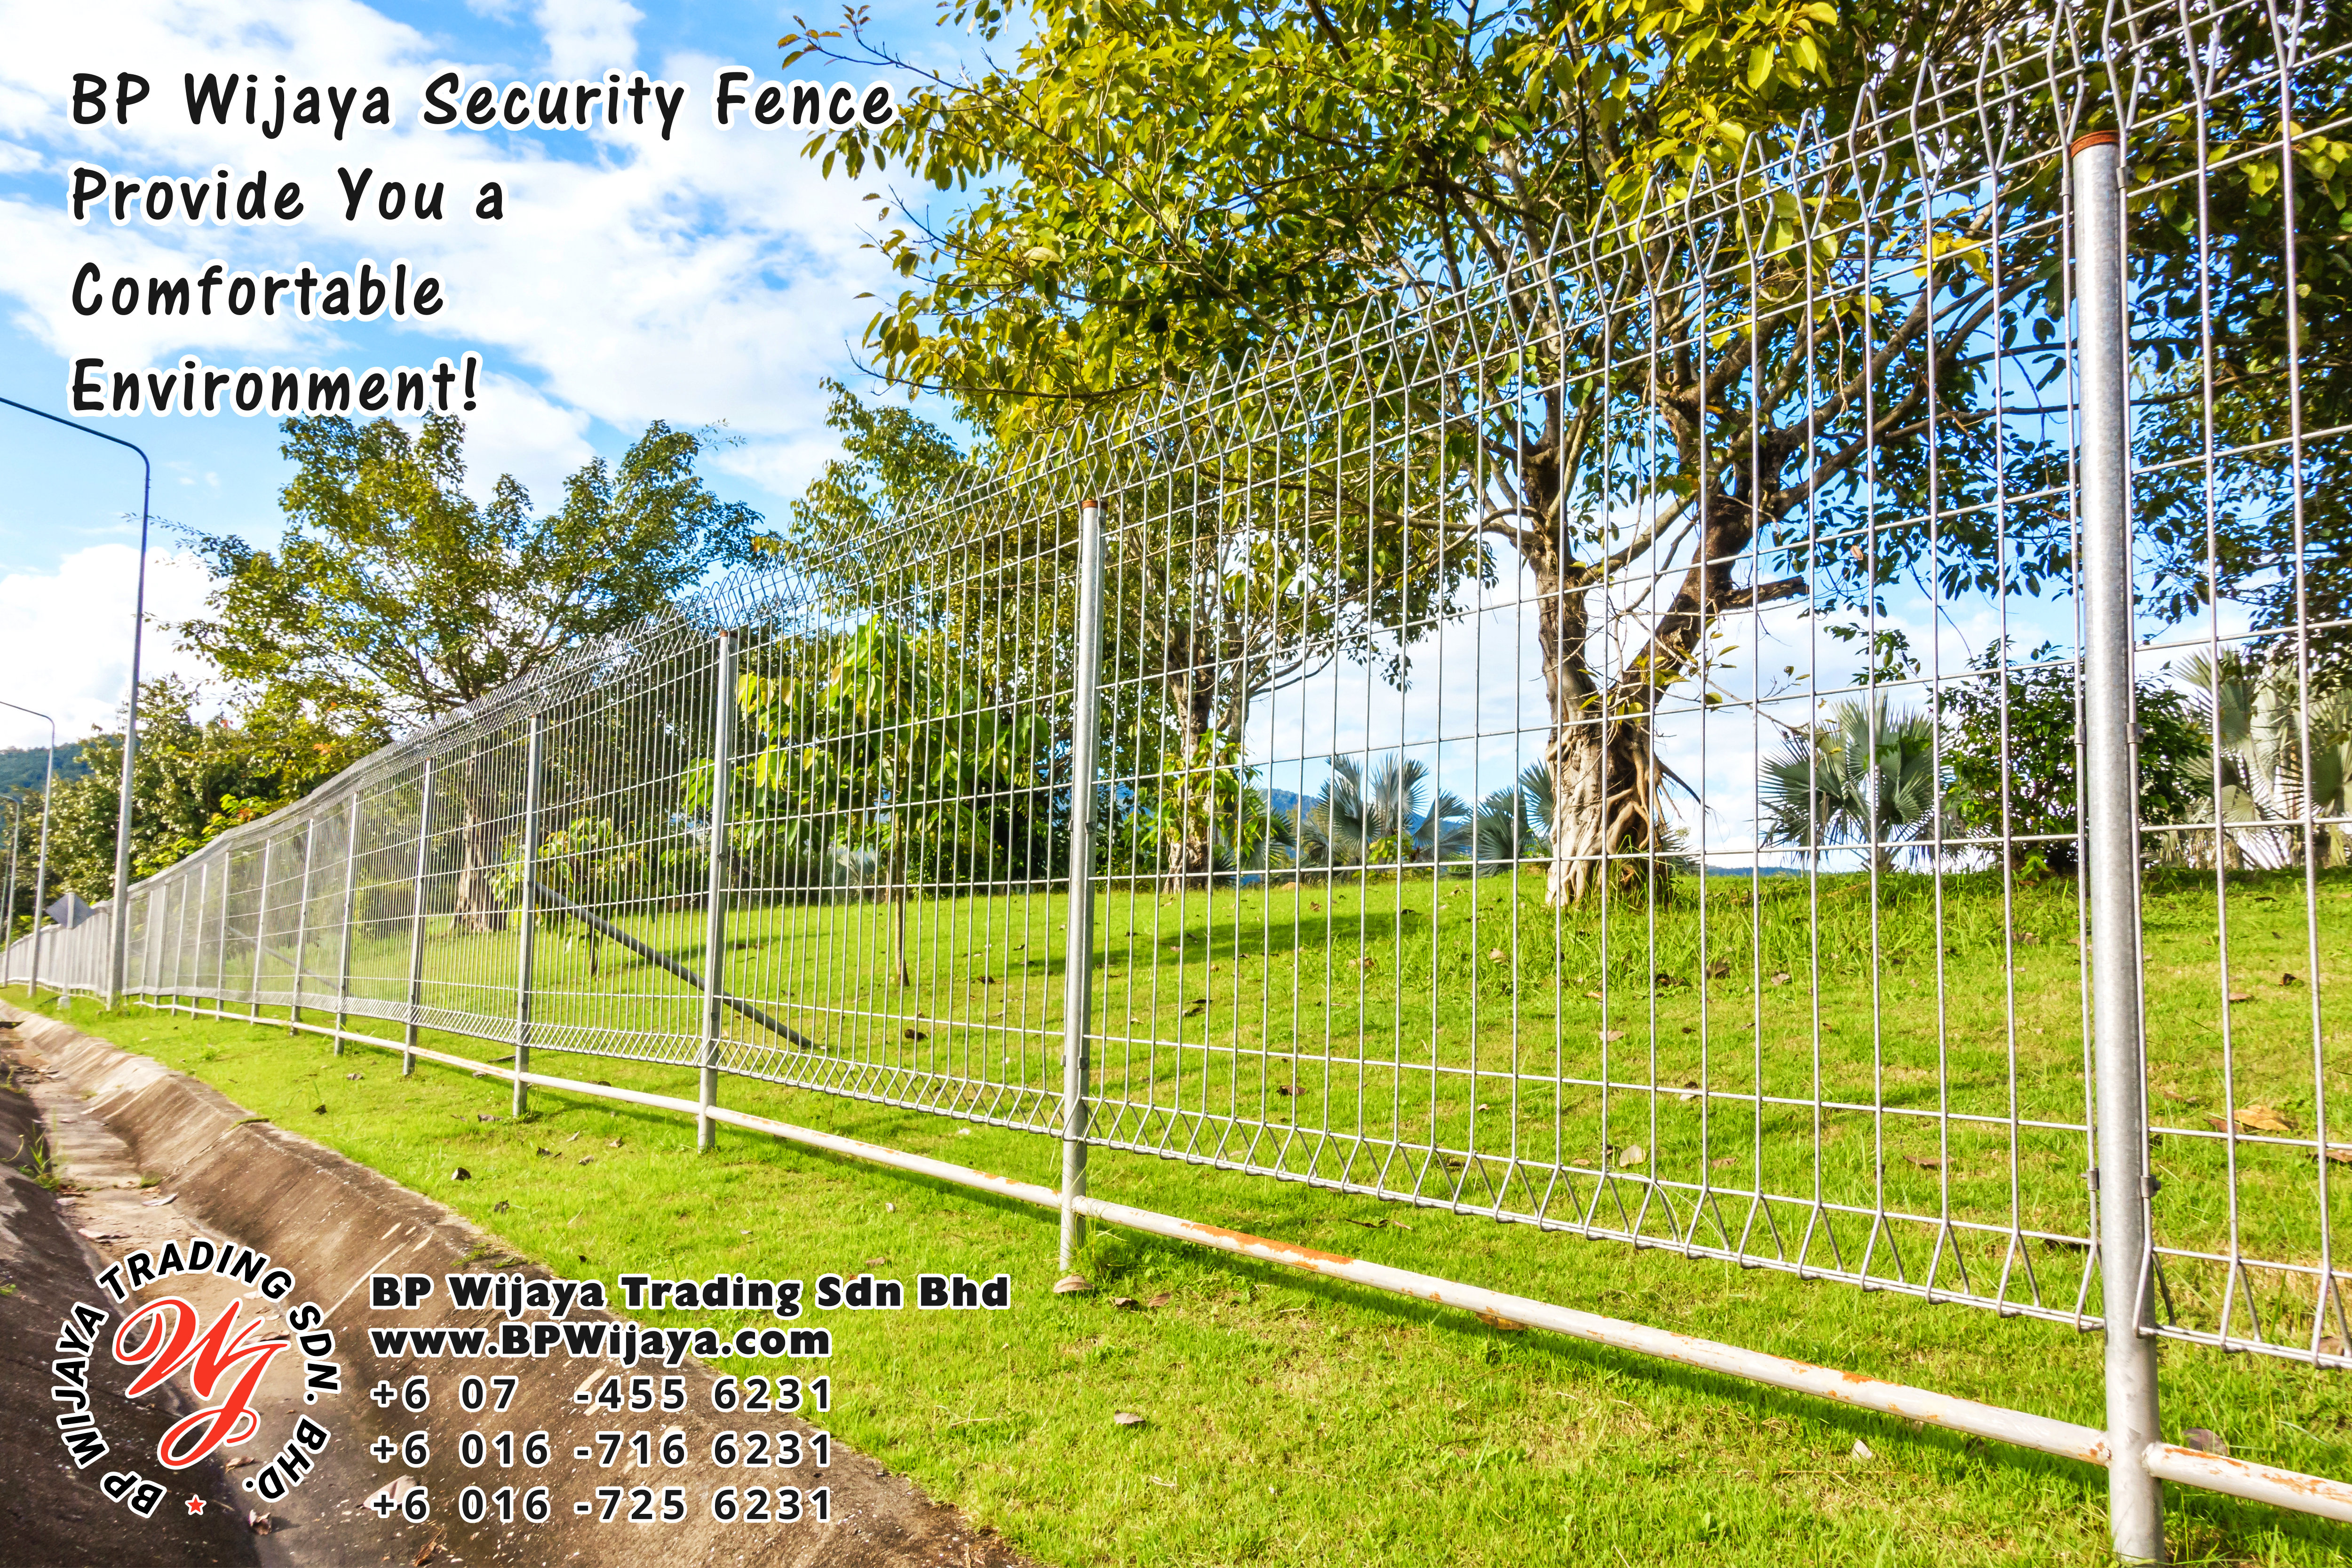 BP Wijaya Trading Sdn Bhd Malaysia Pahang Kuantan Temerloh Mentakab Manufacturer of Safety Fences Building Materials for Housing Construction Site Industial Security Fencing Factory A01-50